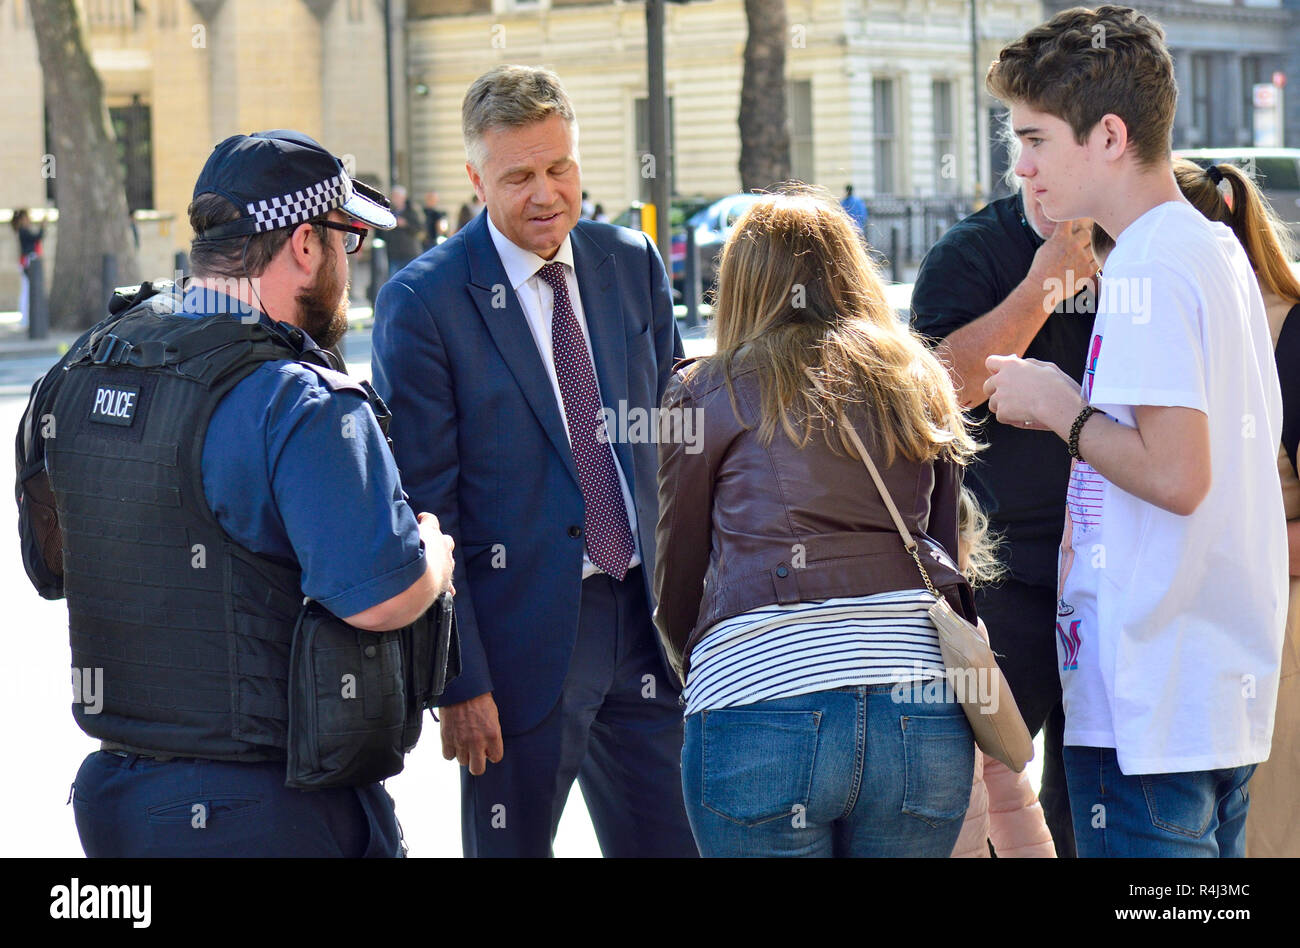 Andy Bell - Political Editor, Channel 5 News - outside Downing Street, 2018. Talking to police and a family after a young girl was knocked over by his Stock Photo